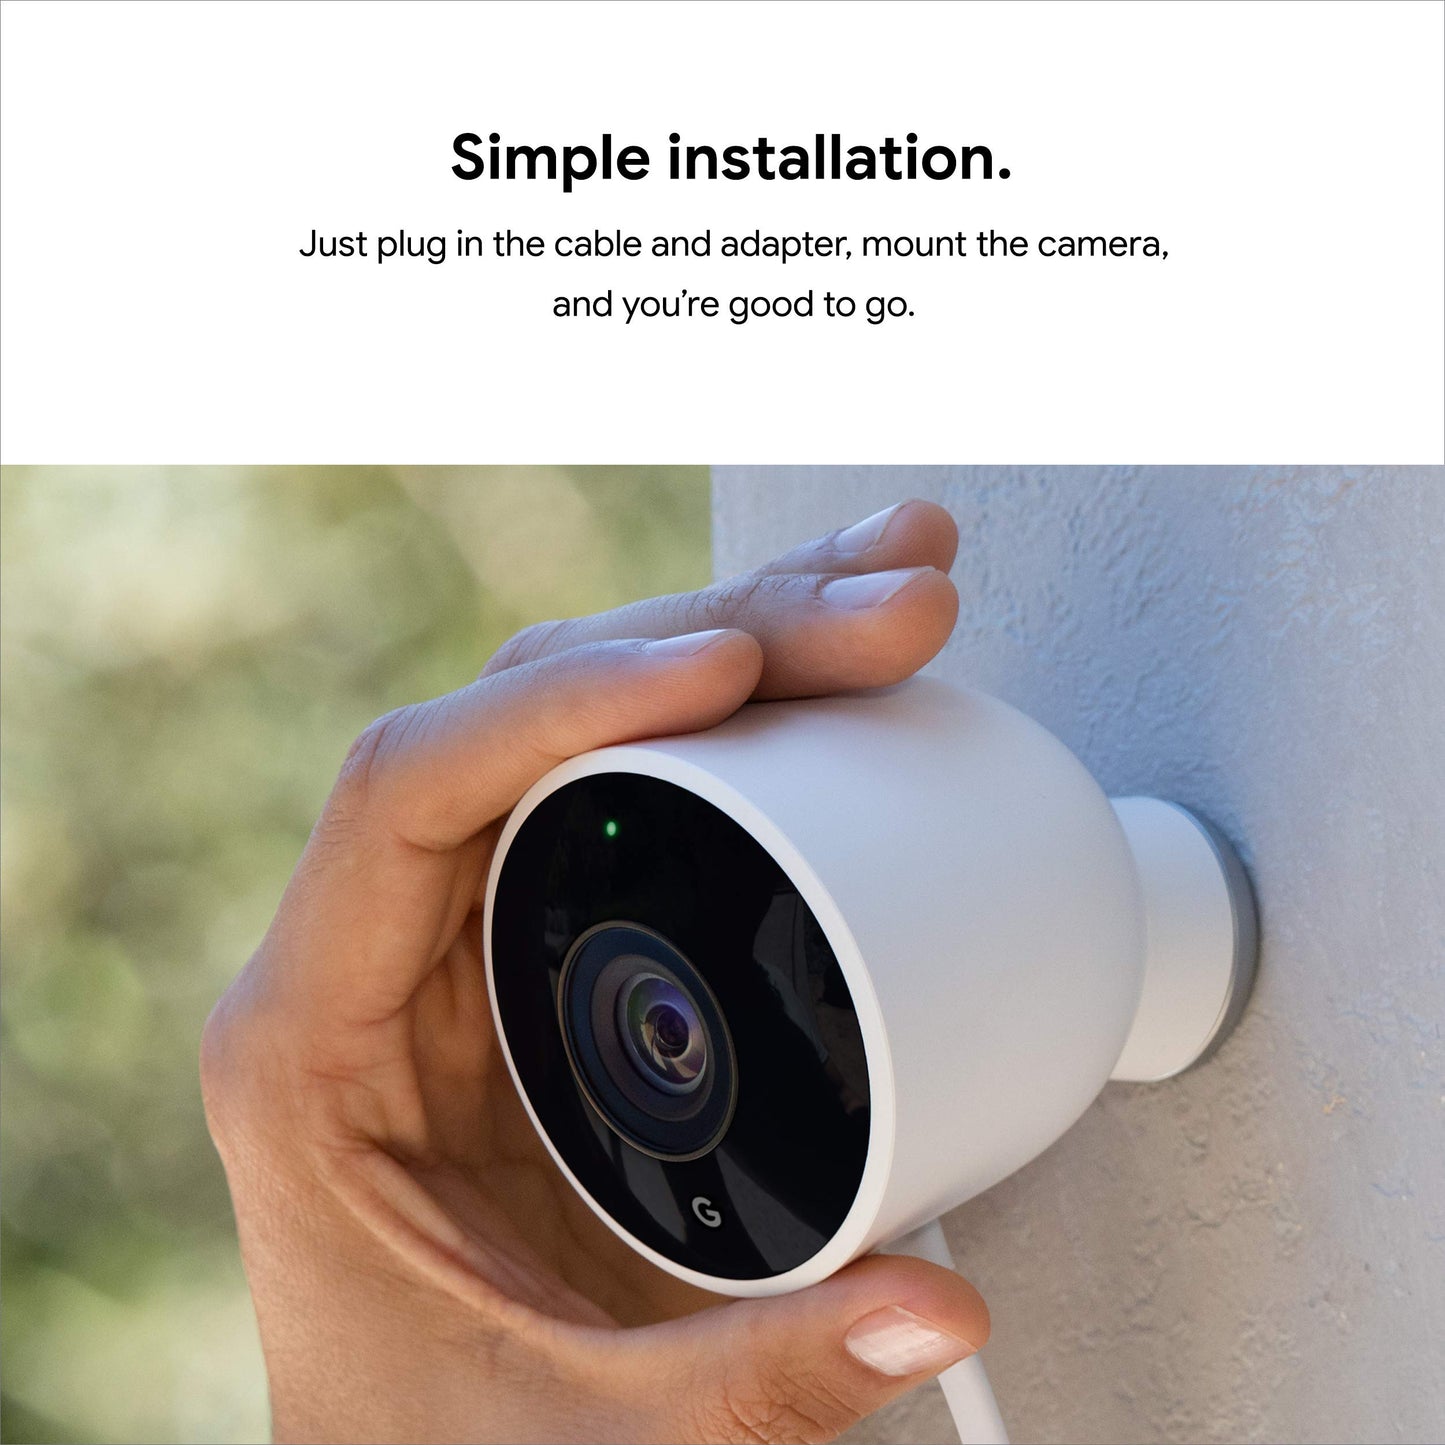 Google Nest Camera Wired Indoor/Outdoor Security Camera - 2 Pack- NC2400ES ( Sale)